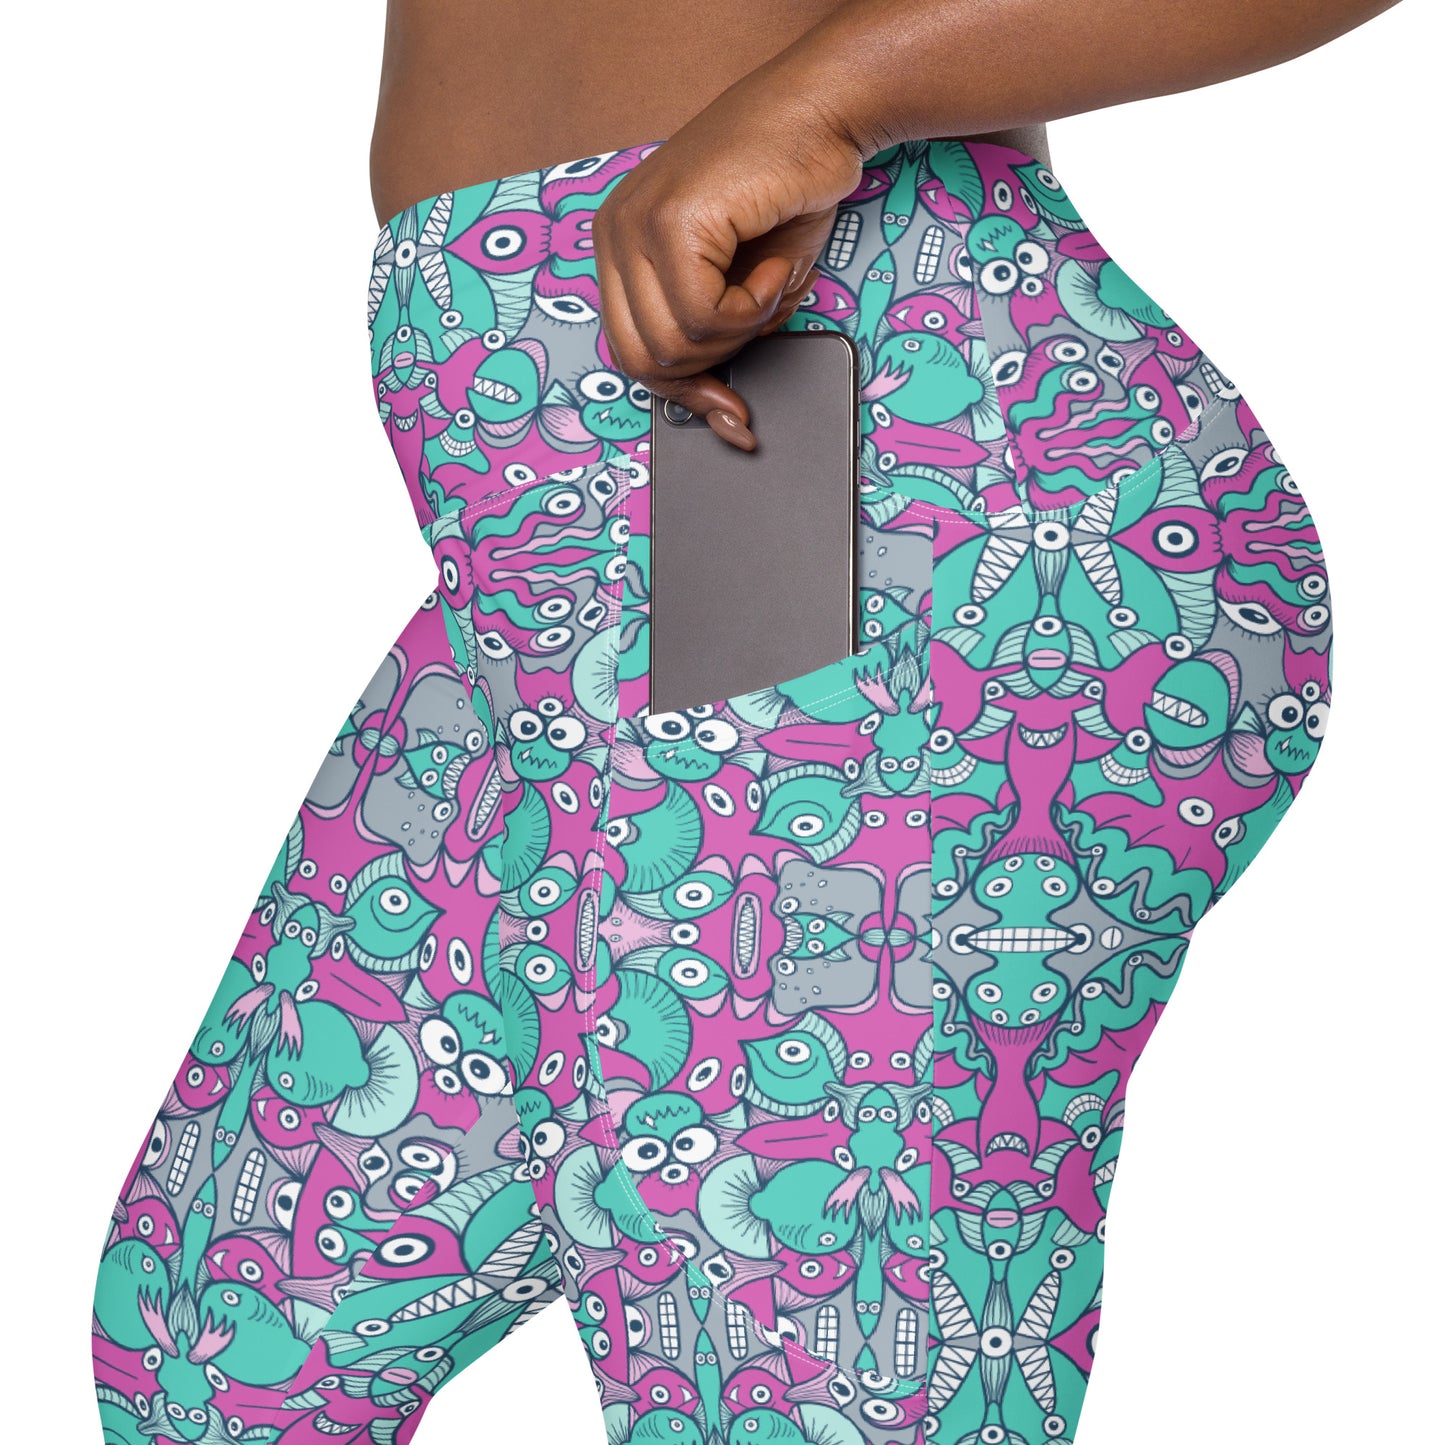 Sea creatures from an alien world Crossover leggings with pockets. Product details